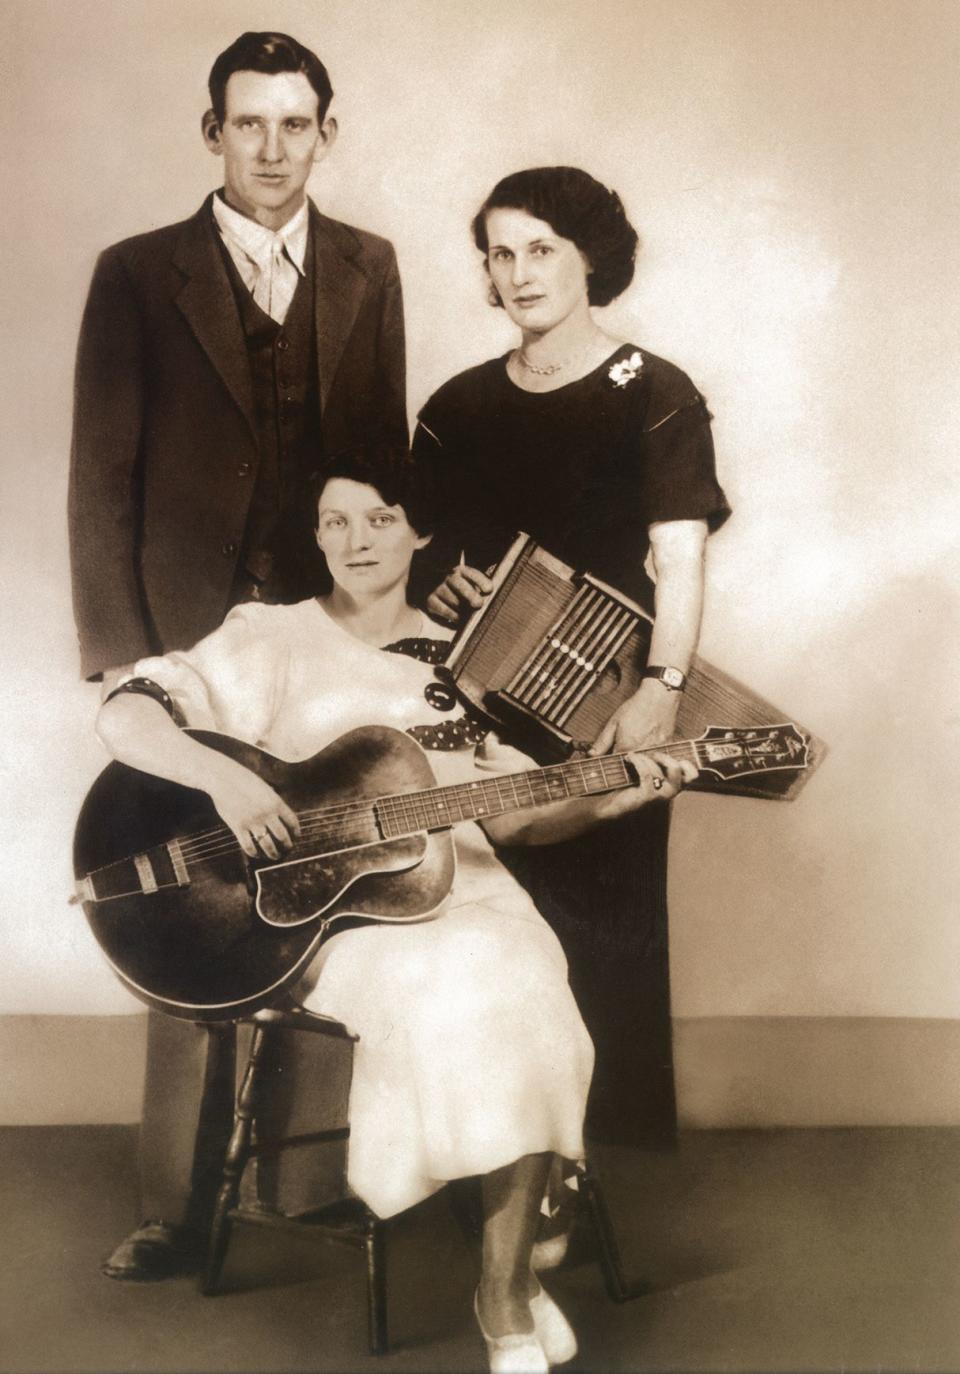 The original Carter Family band  in 1930. (from left) A.P., Maybelle  with her Gibson L-5, and Sara